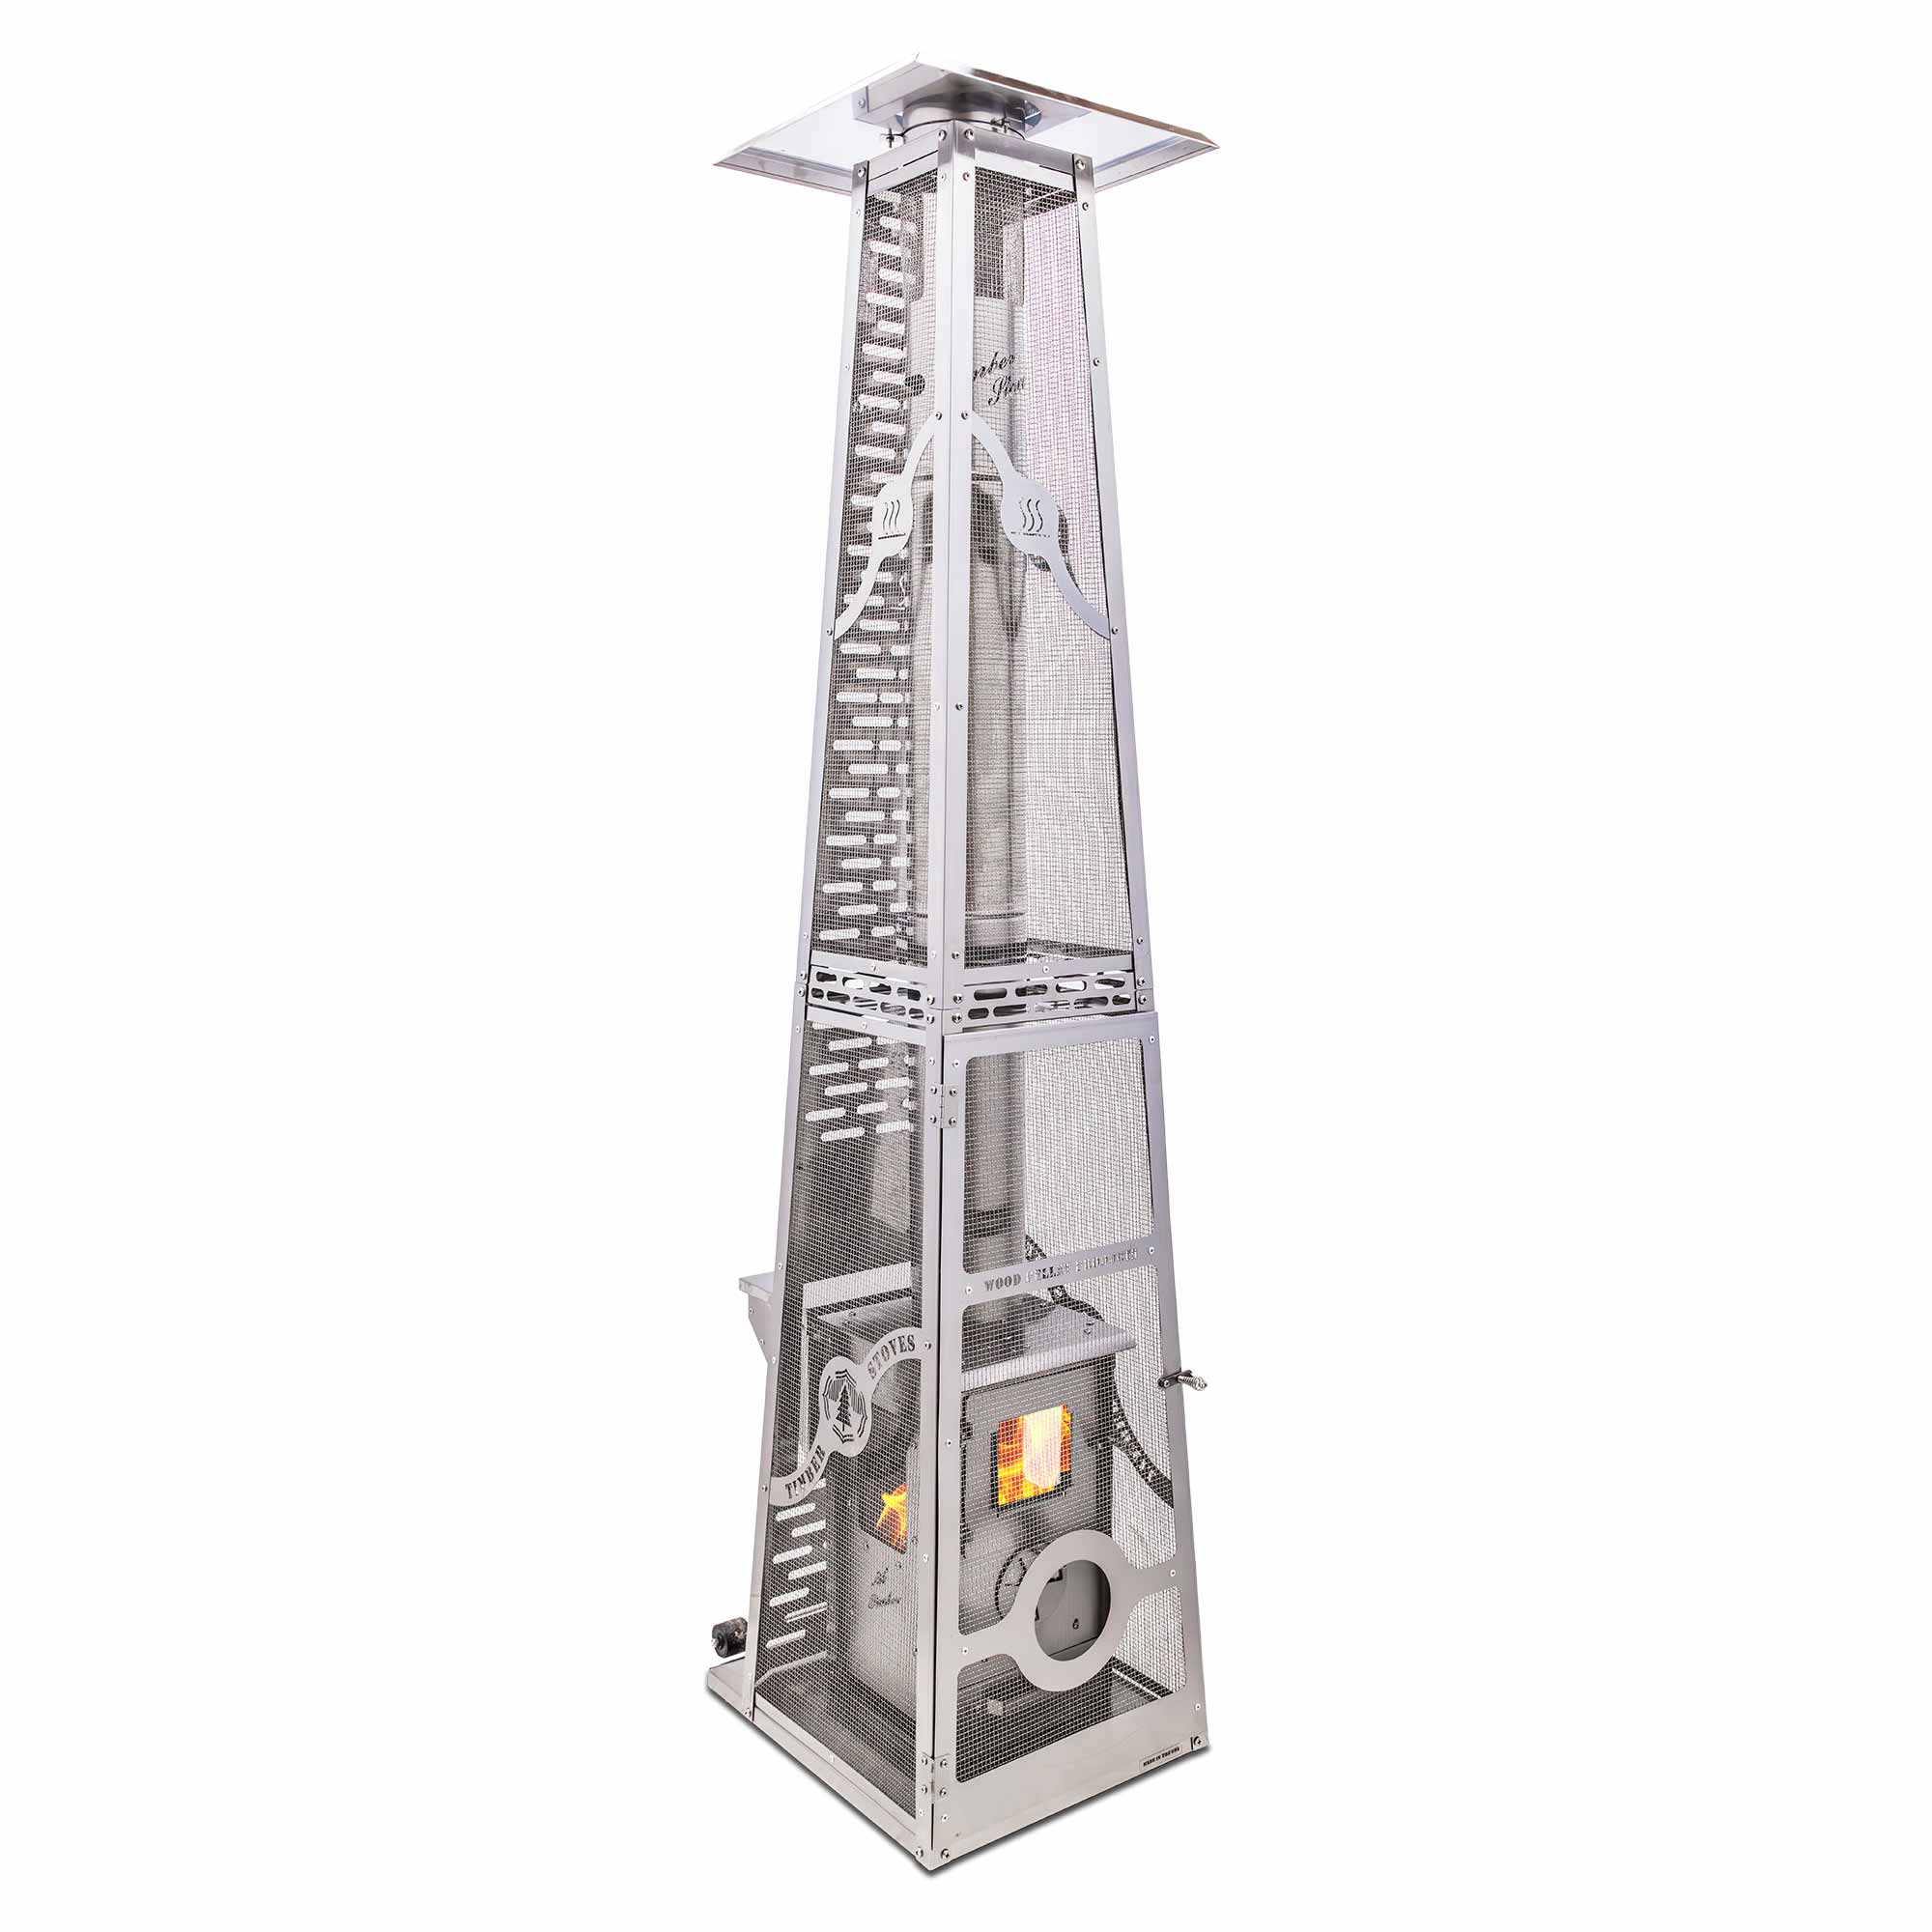 Lil' Timber Wood Pellet Patio Heater